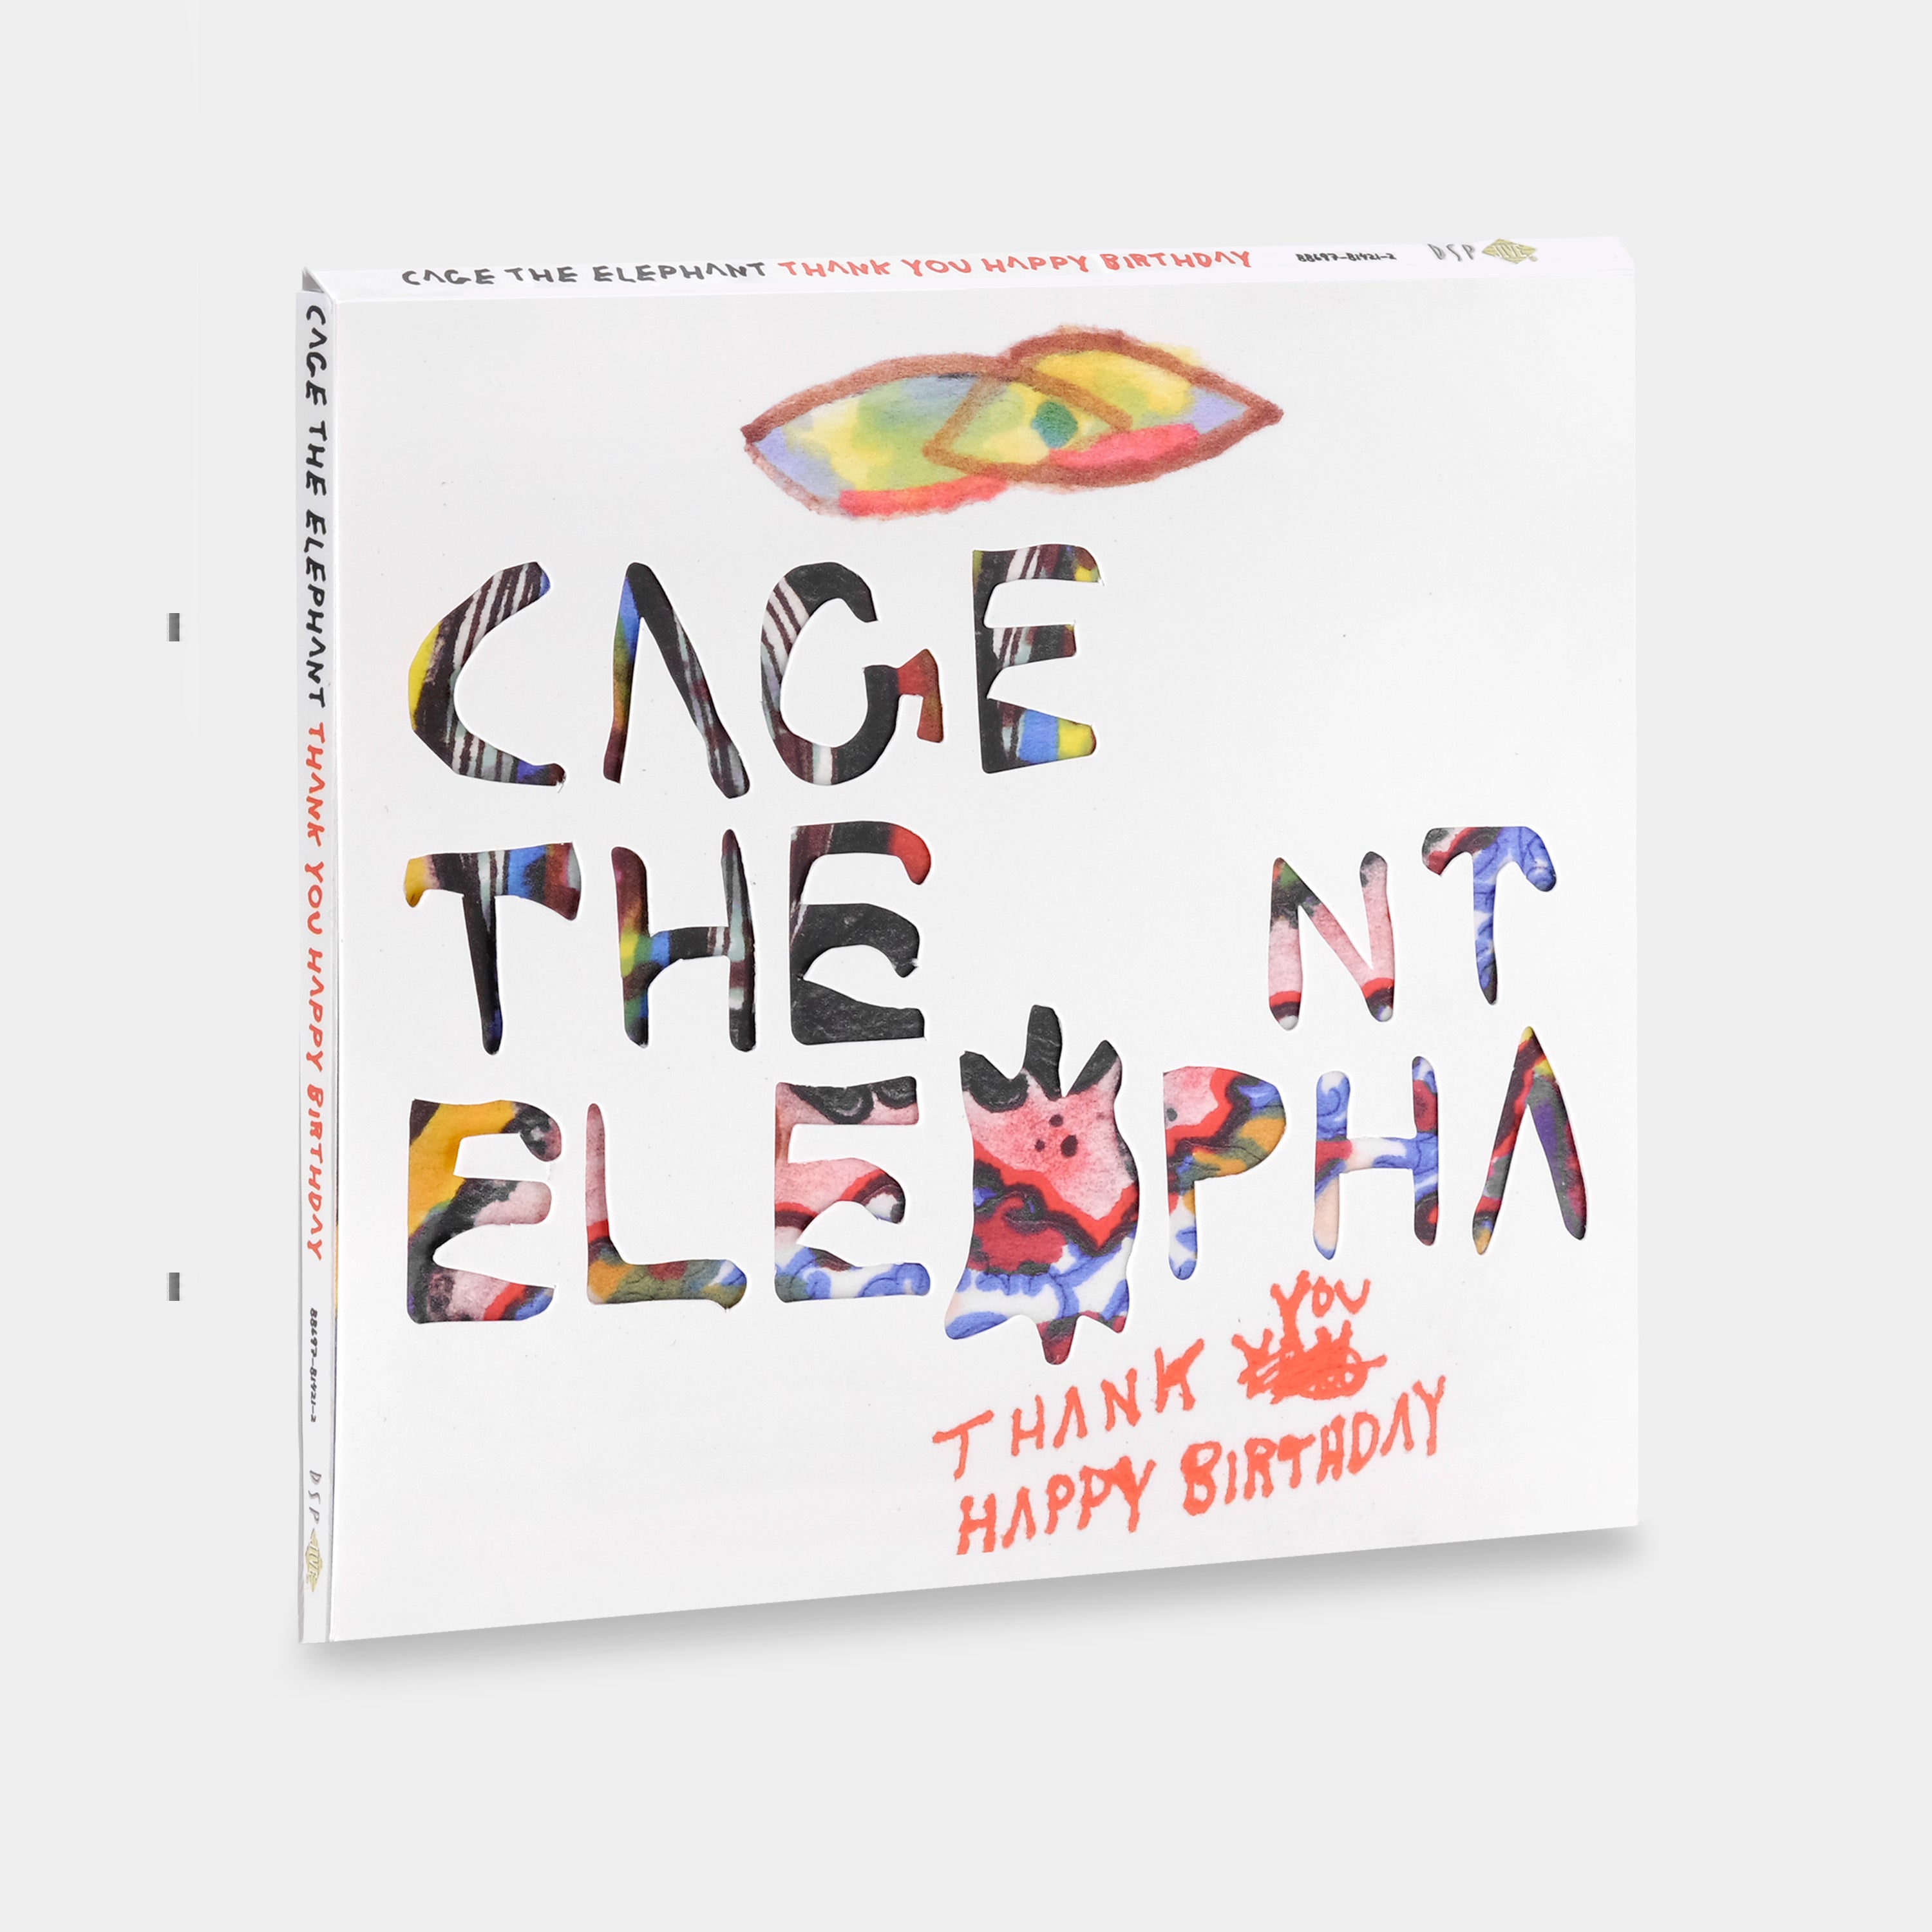 Cage The Elephant - Thank You Happy Birthday CD